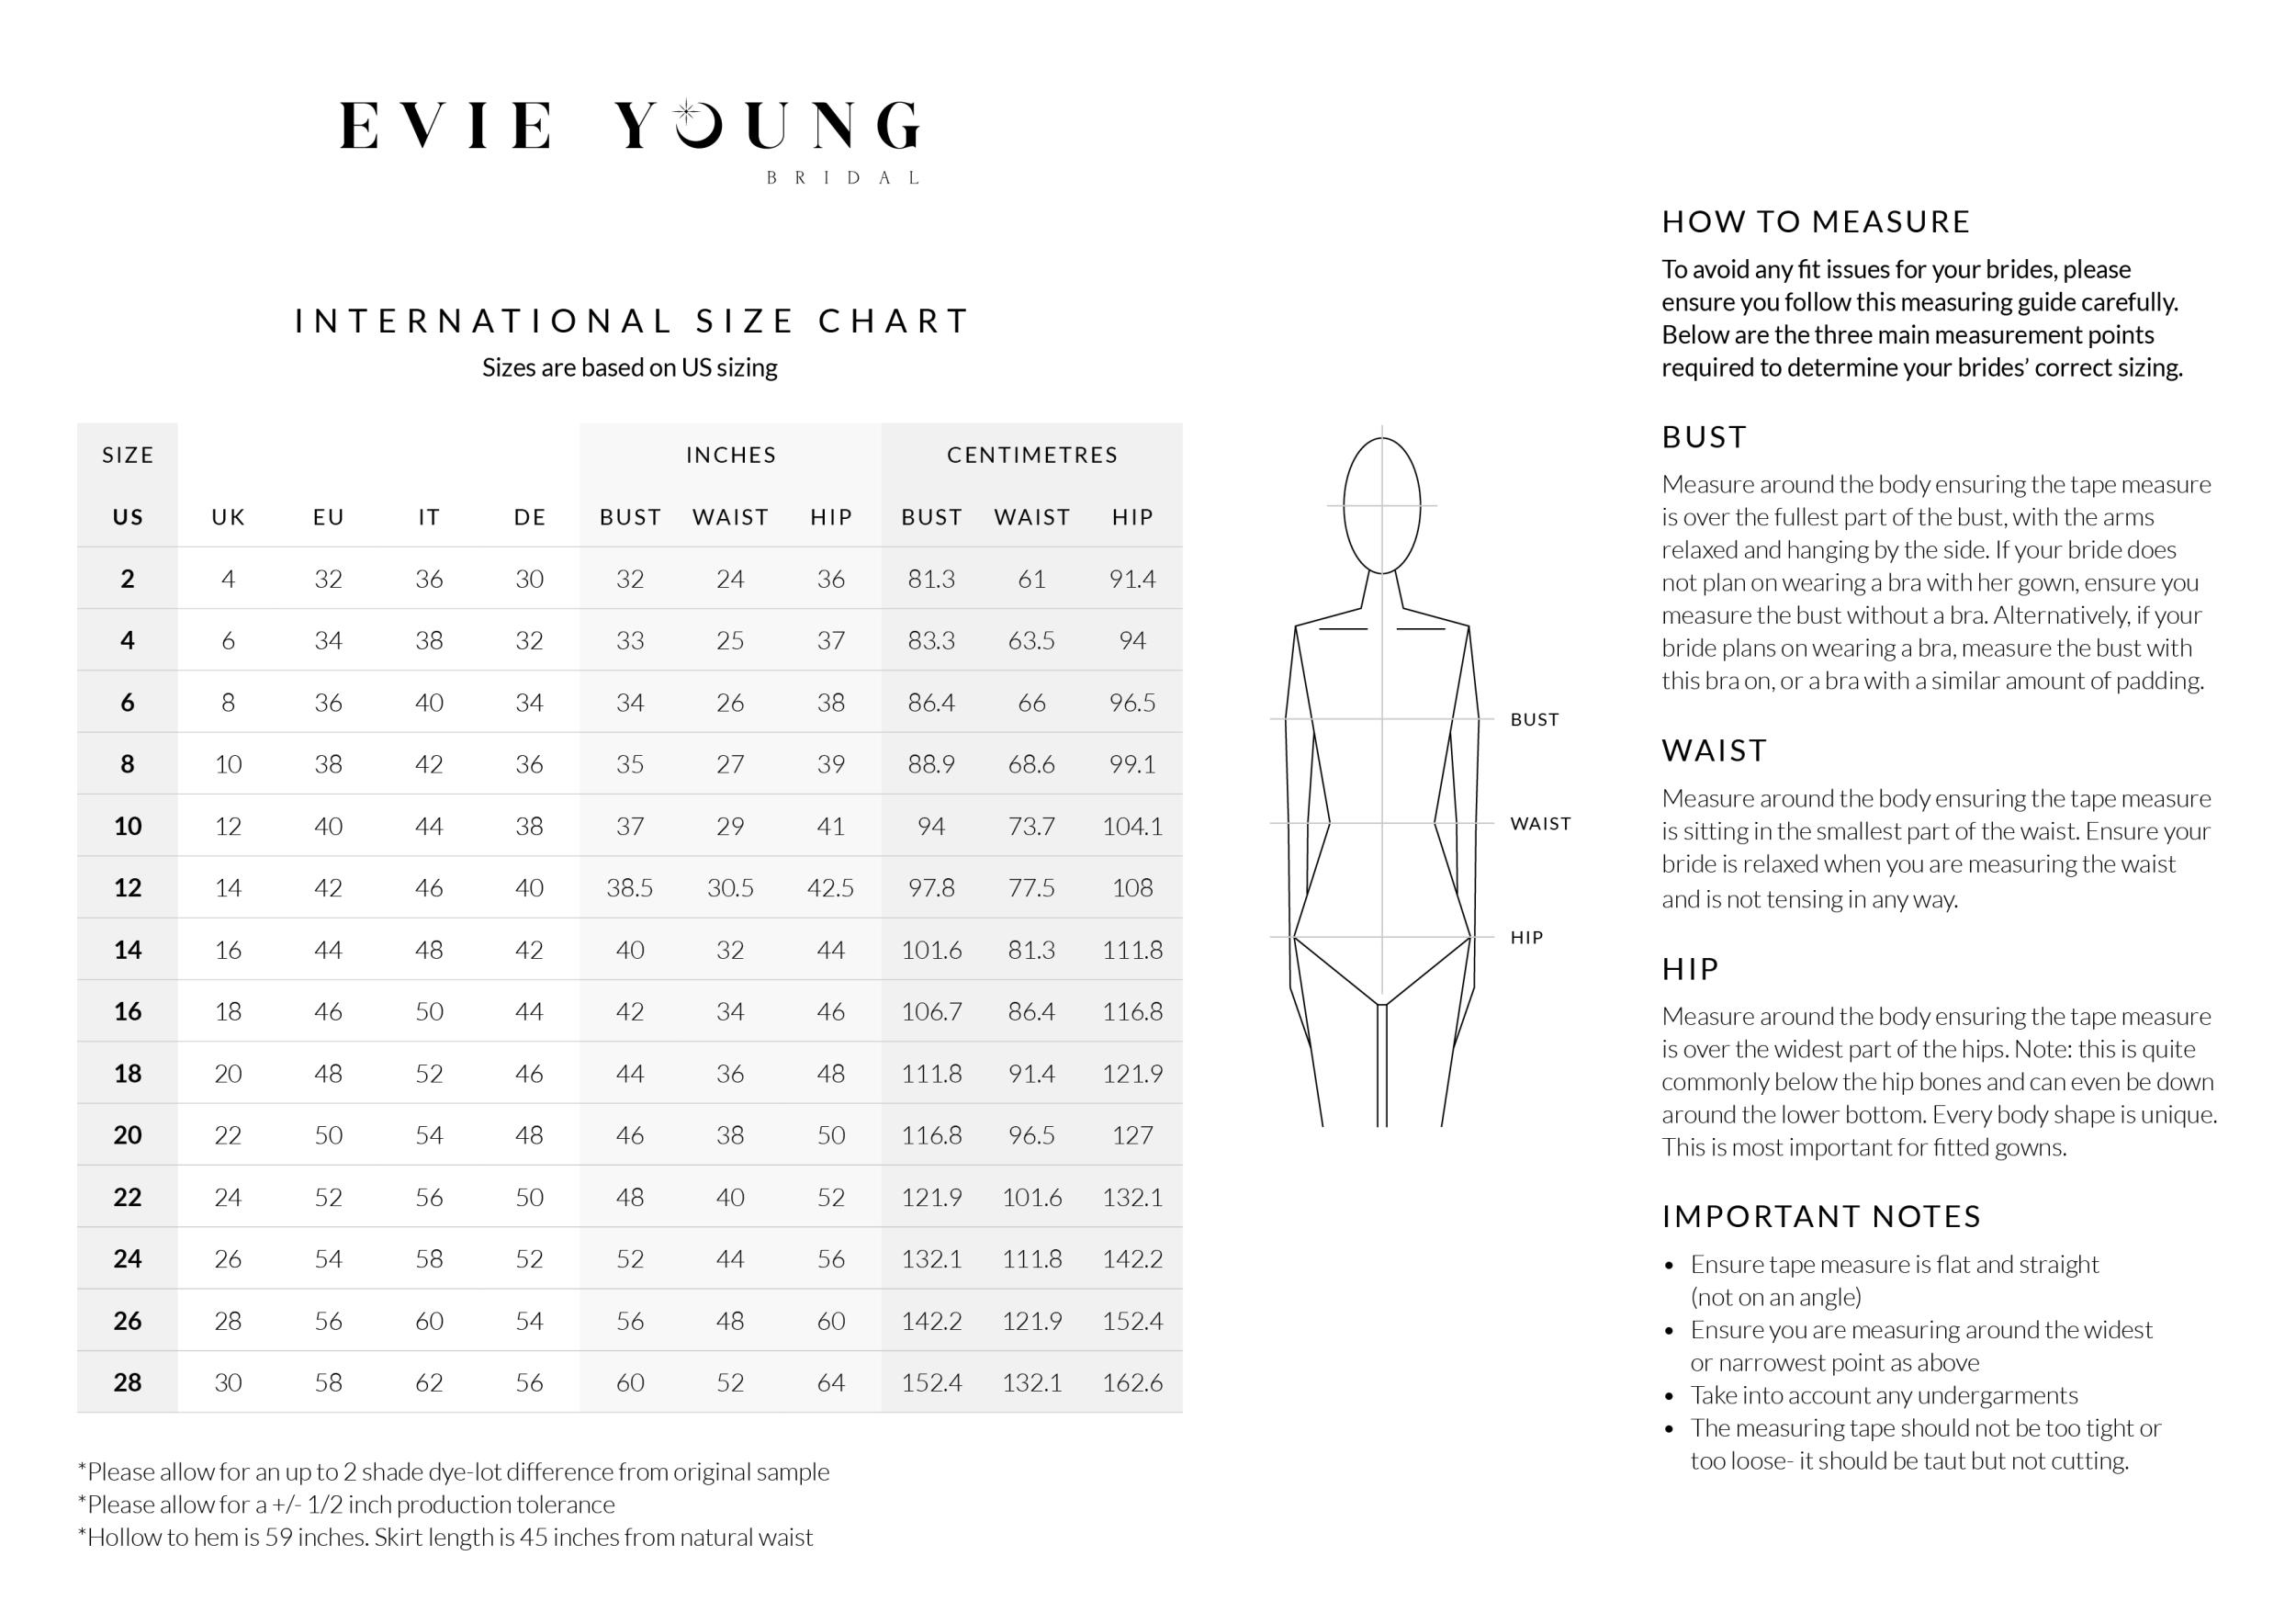 Evie Young Bridal Size Guide